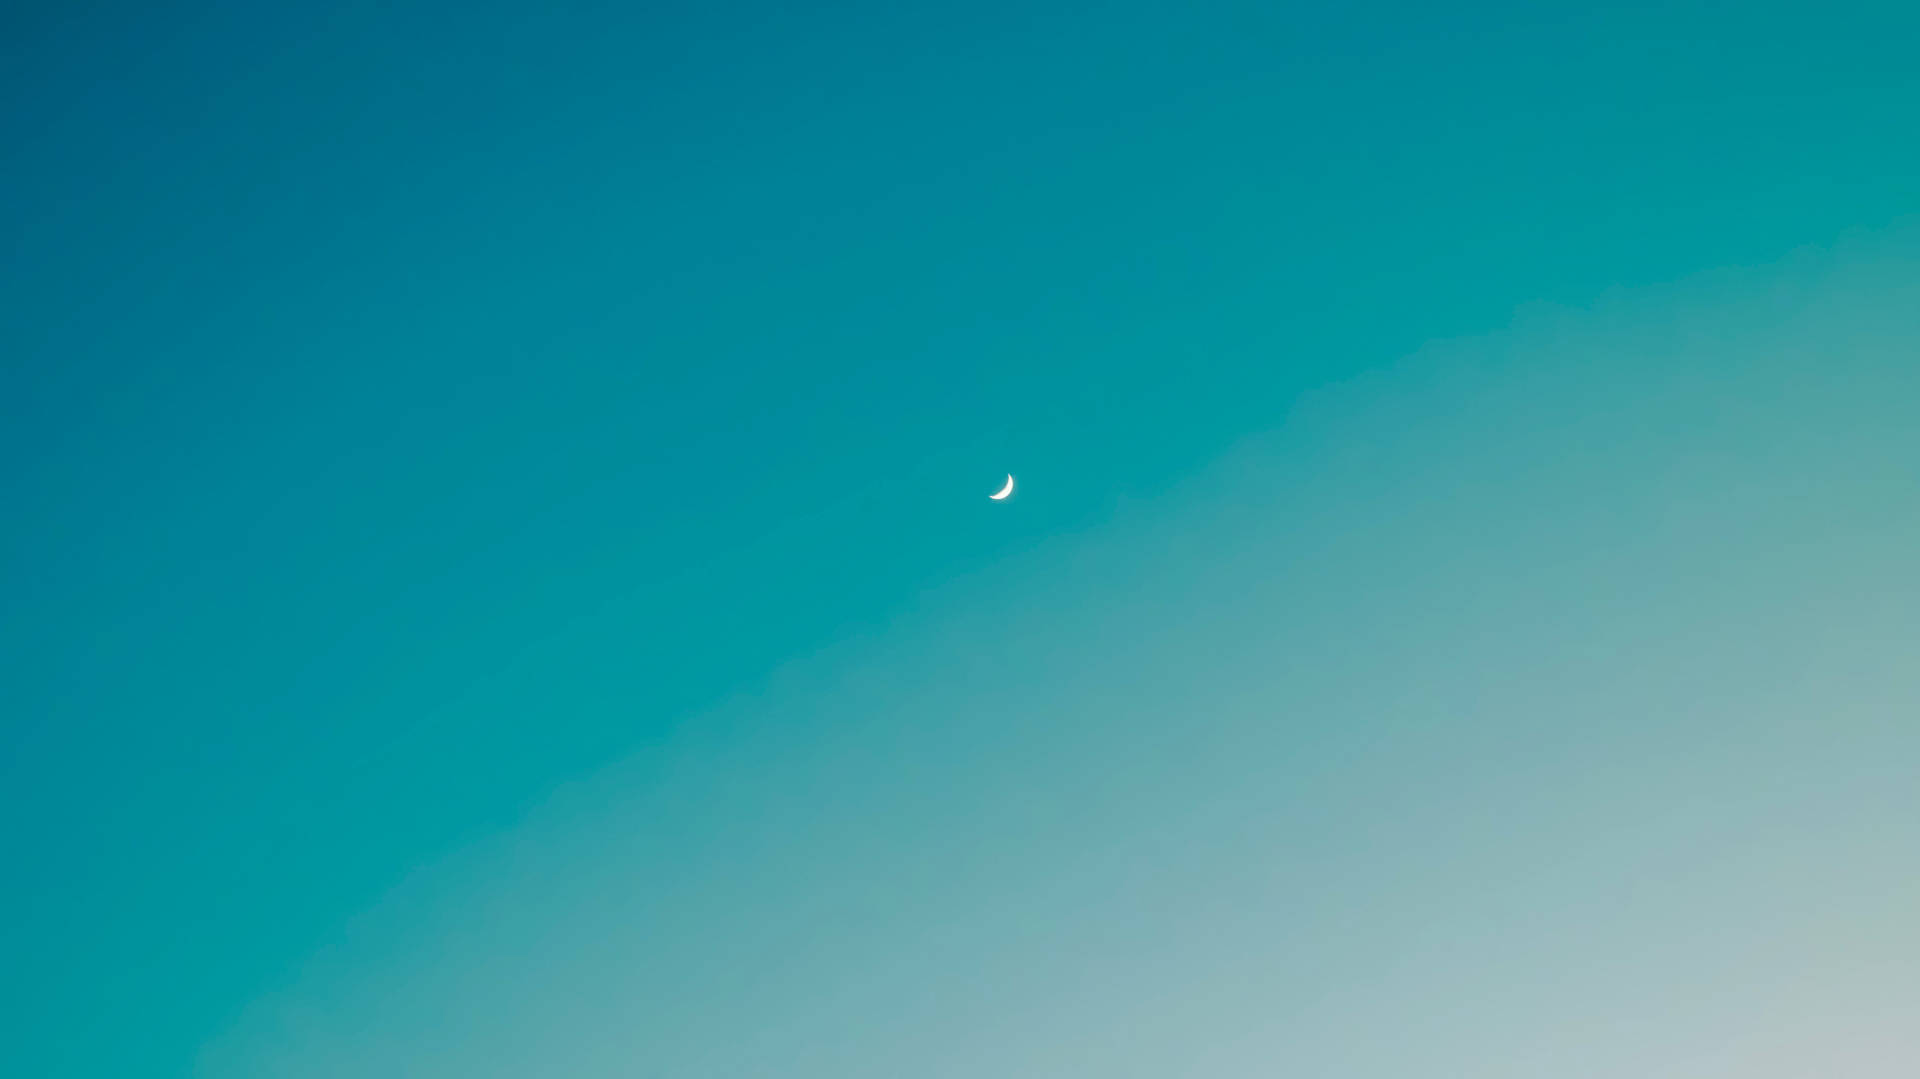 A Vibrant And Beautiful Ombre Sky Featuring A Crescent Moon Background